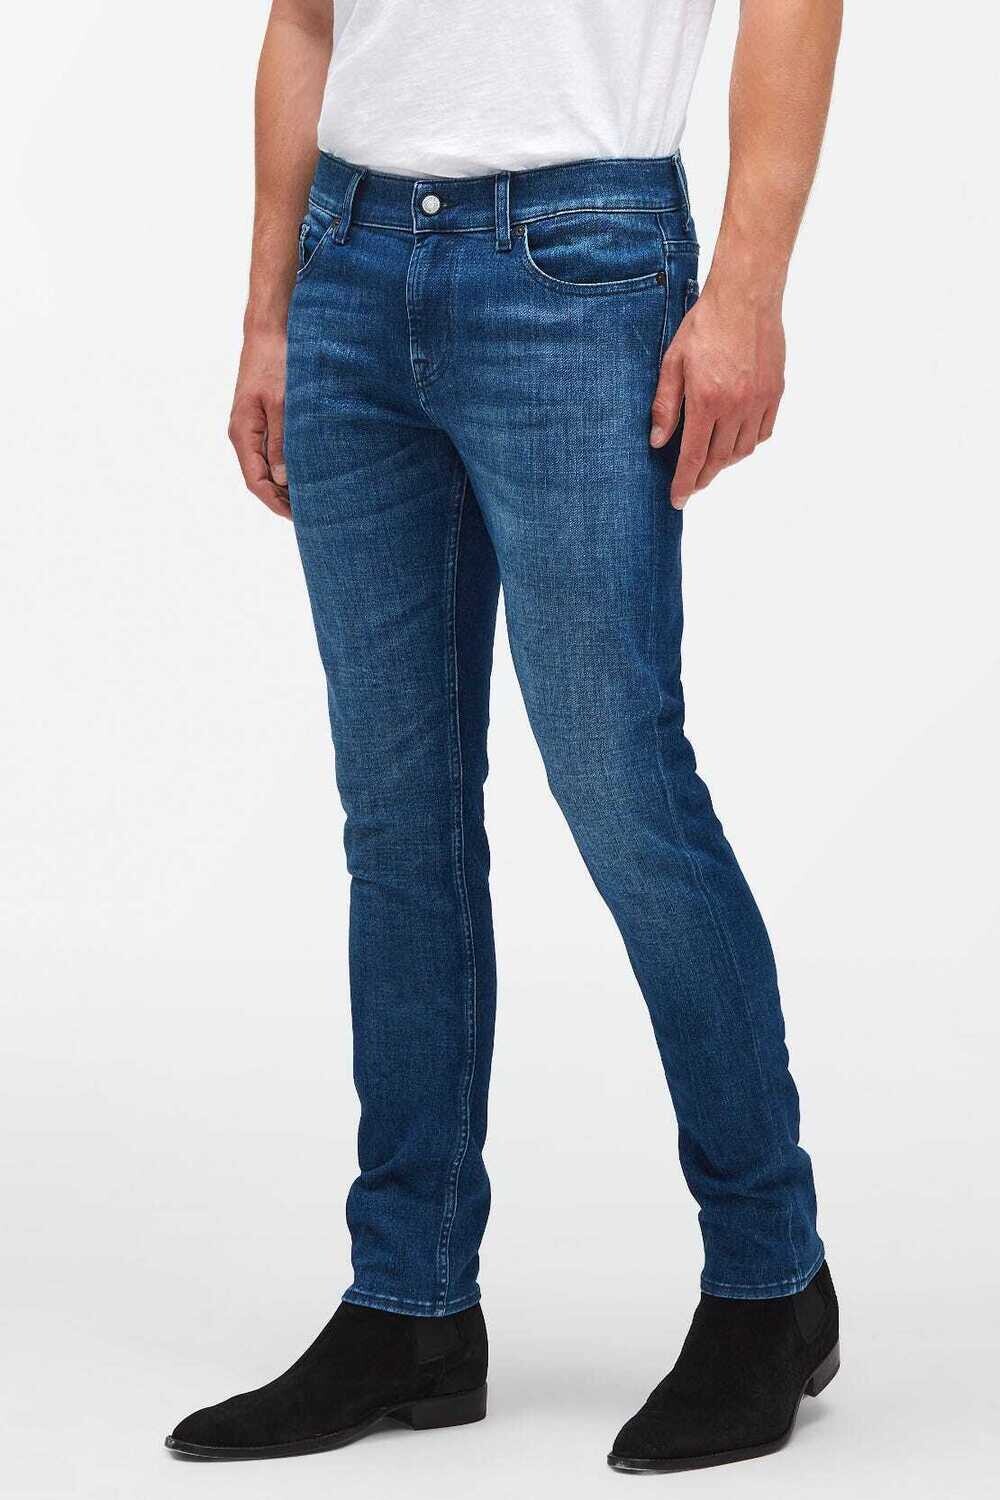 7 For All Mankind Ronnie Jeans